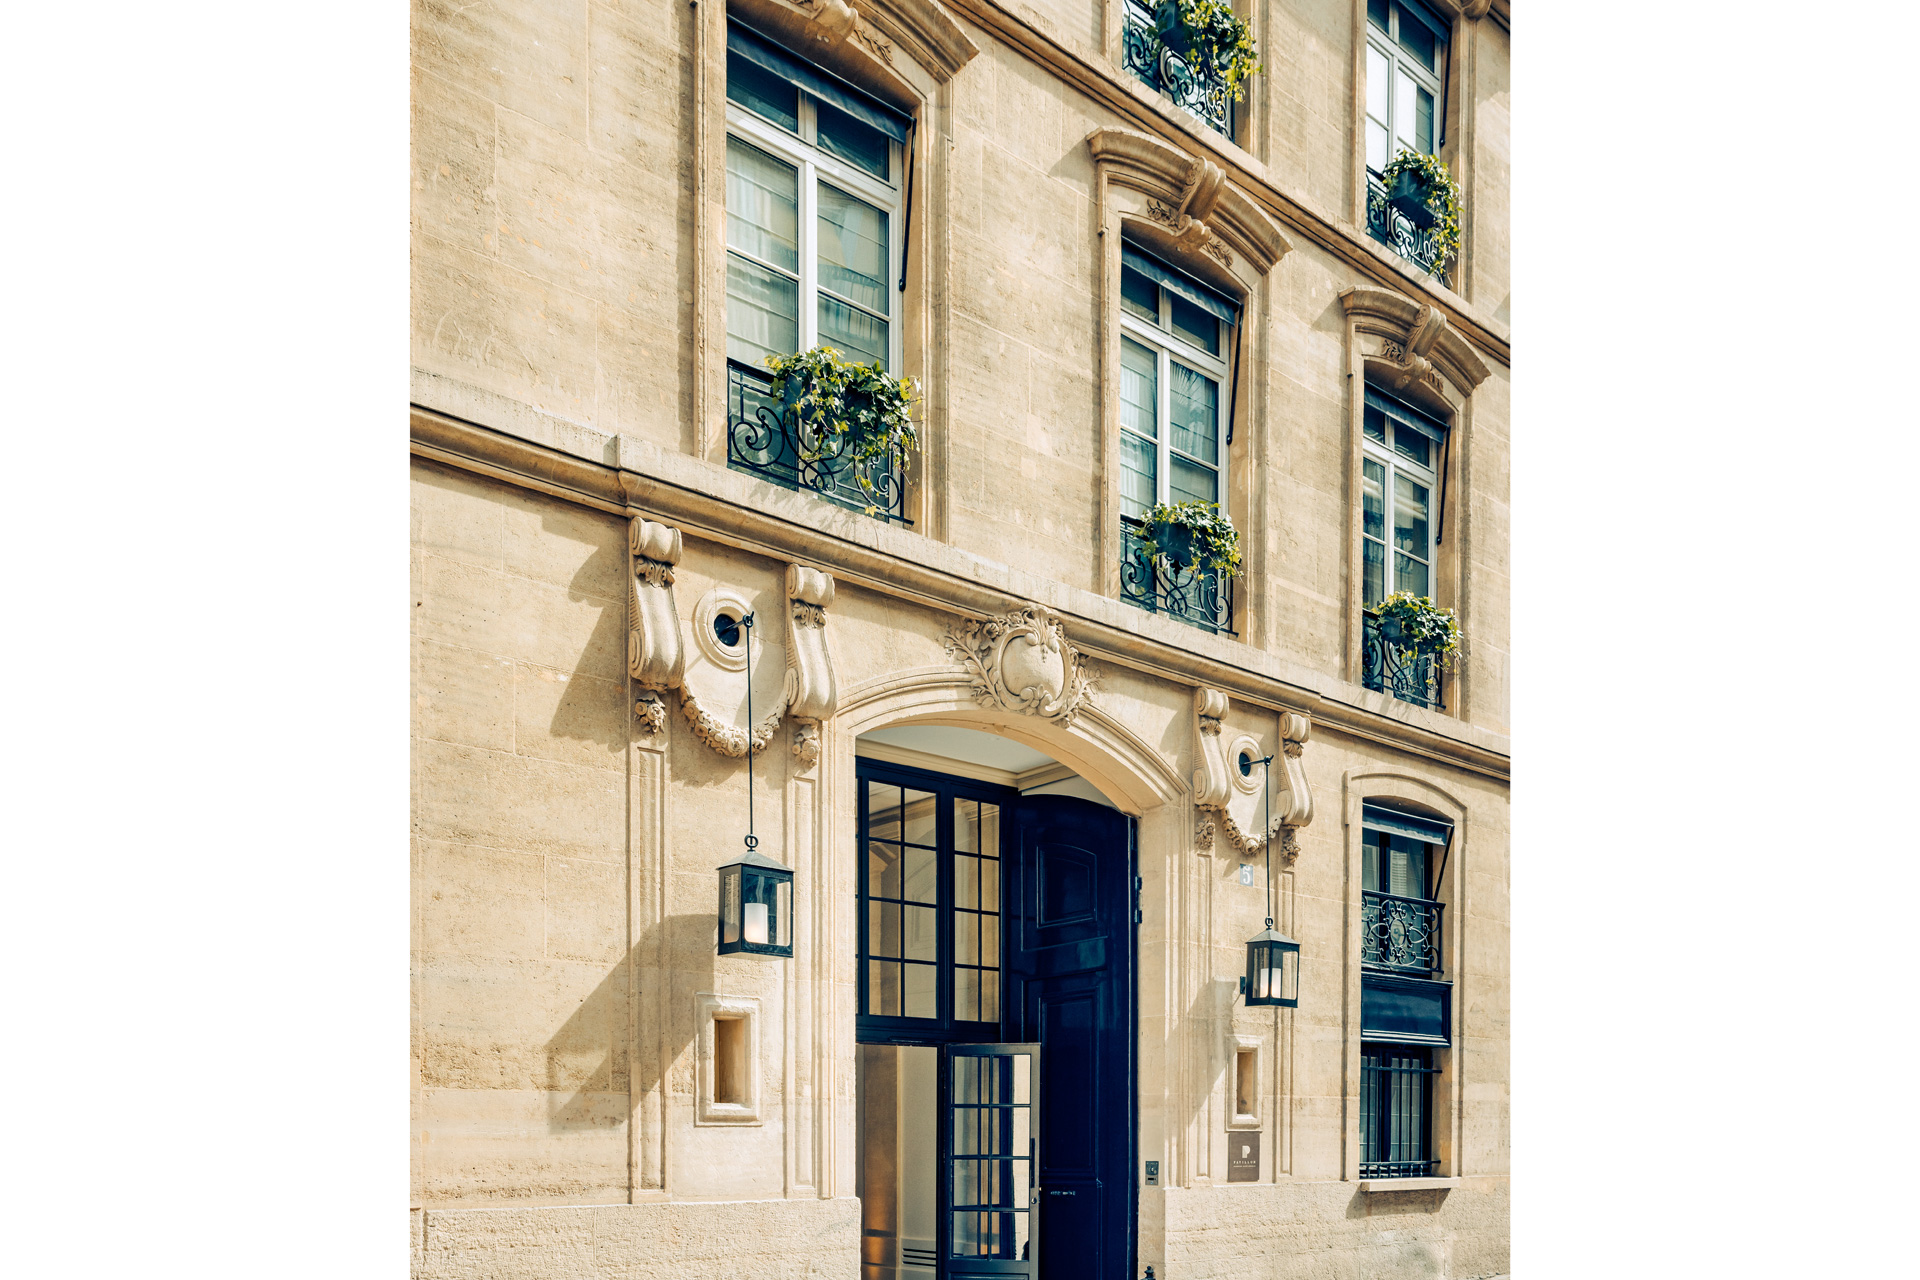 Exterior of Pavillon Faubourg Saint Germain hotel, with sandstone-coloured walls and black windows.